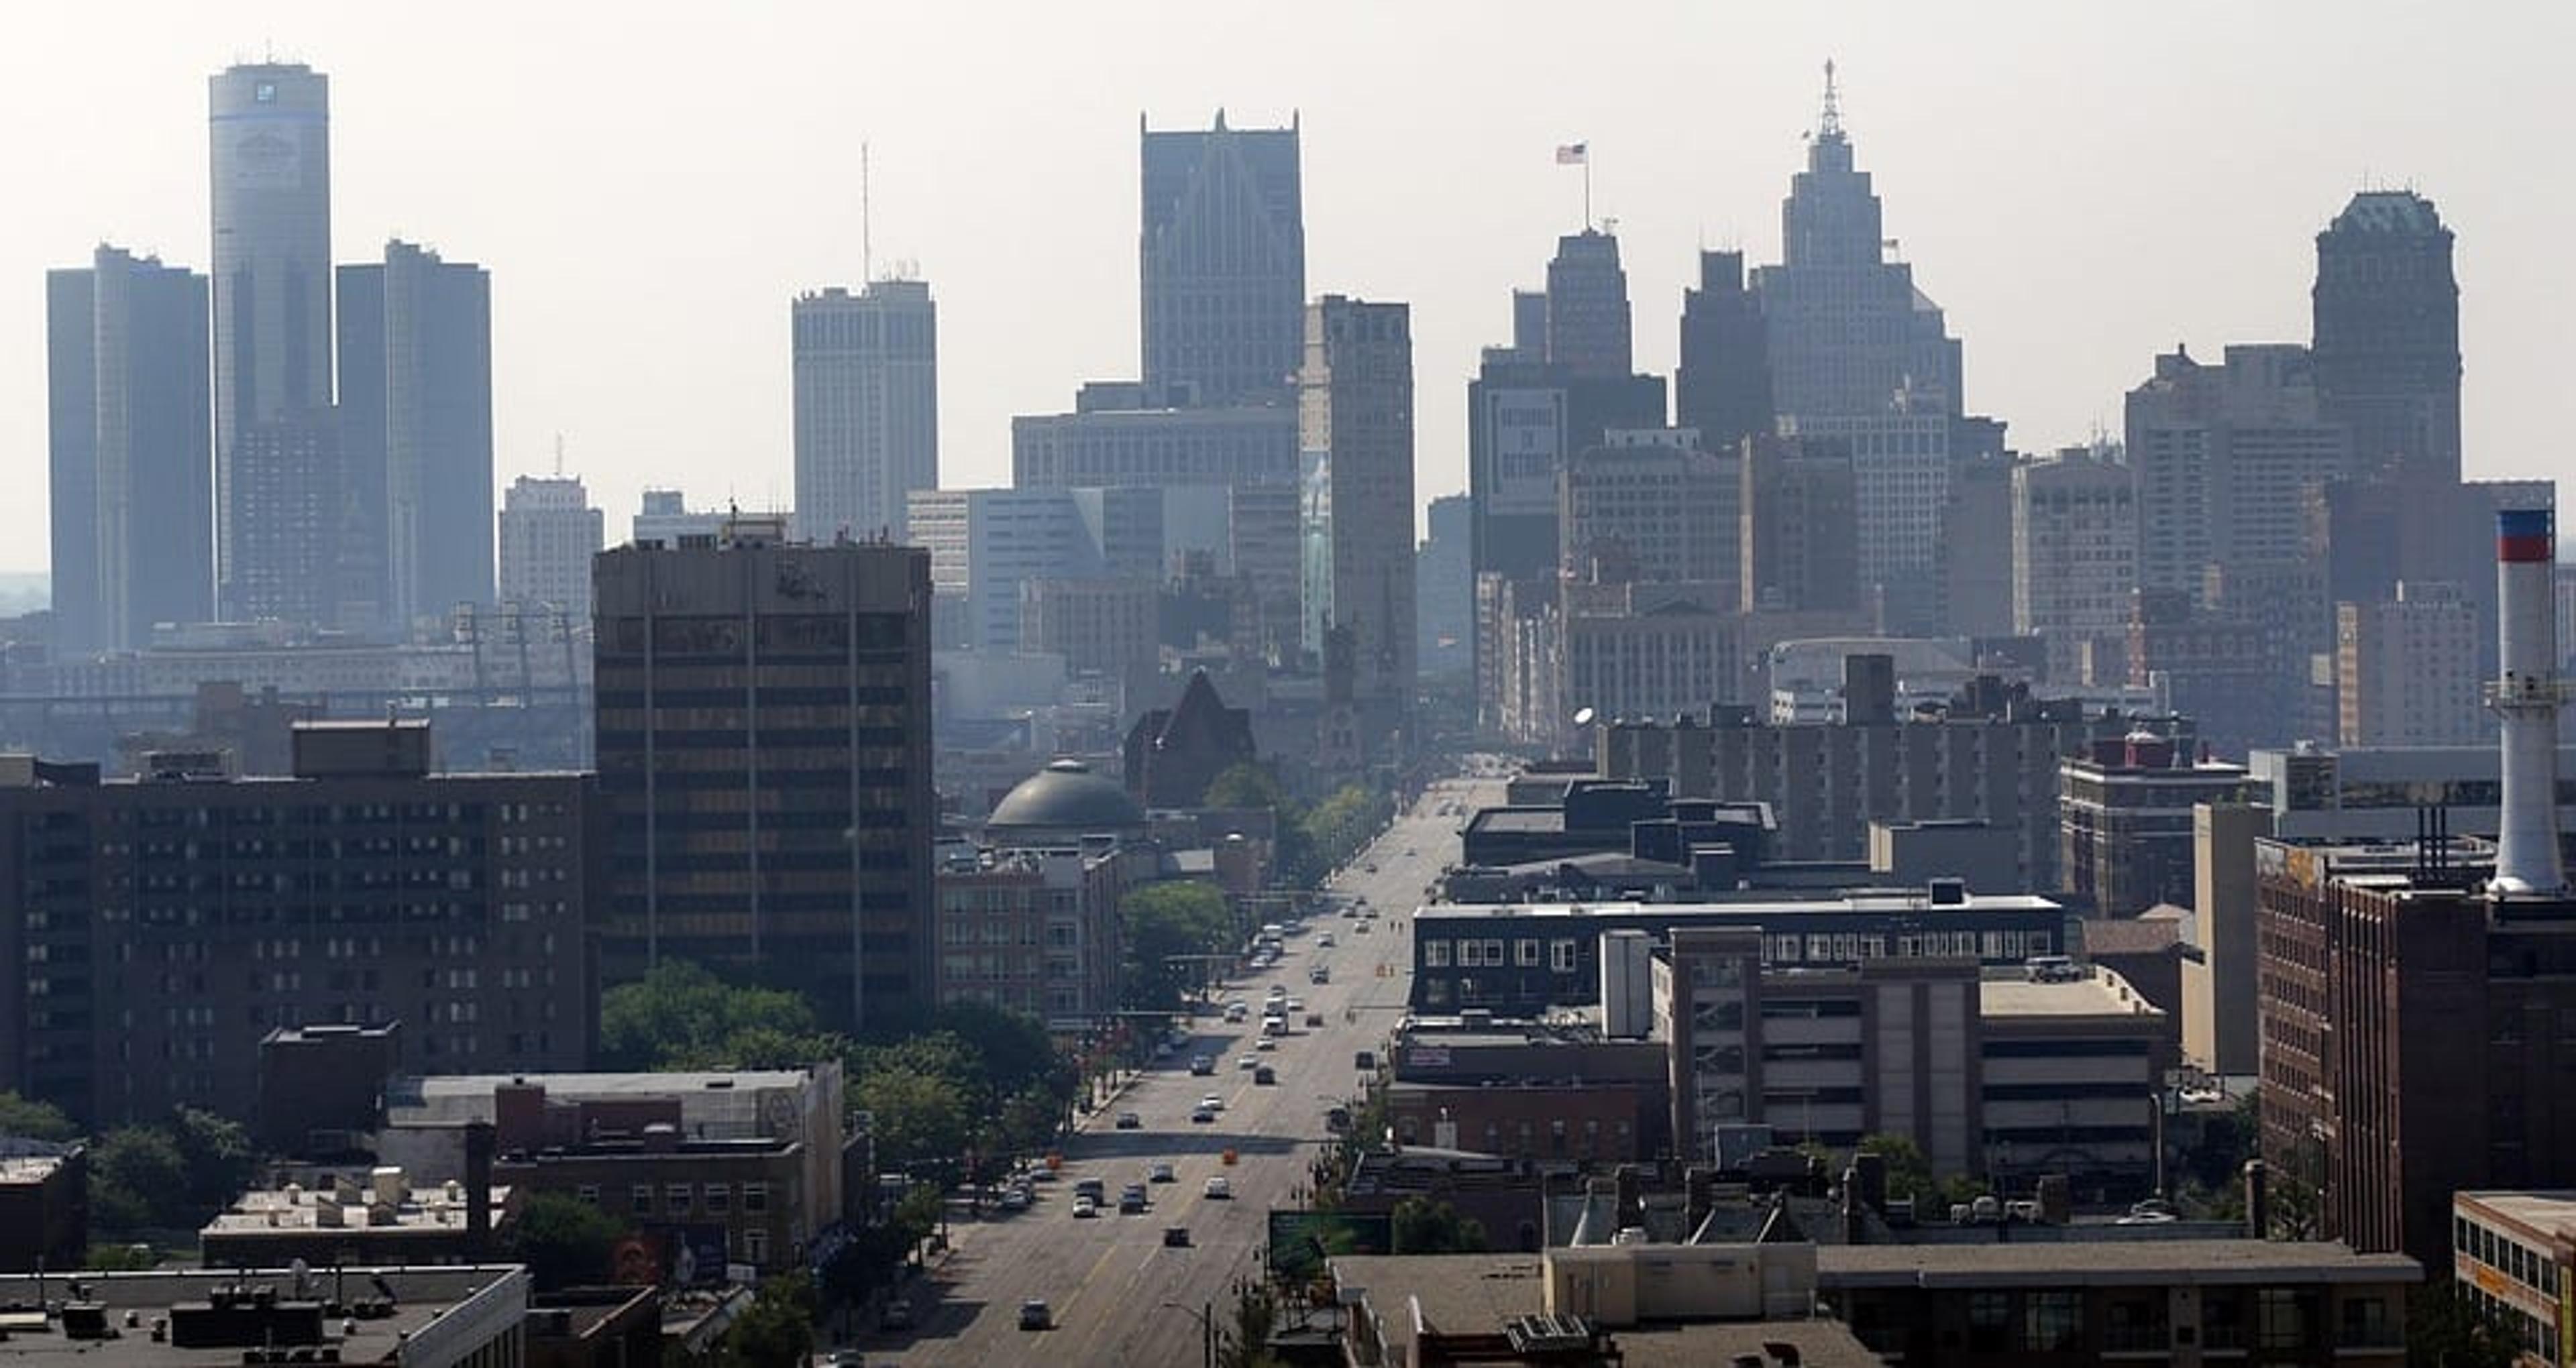 wide view of Detroit with sky scrapers in the background.